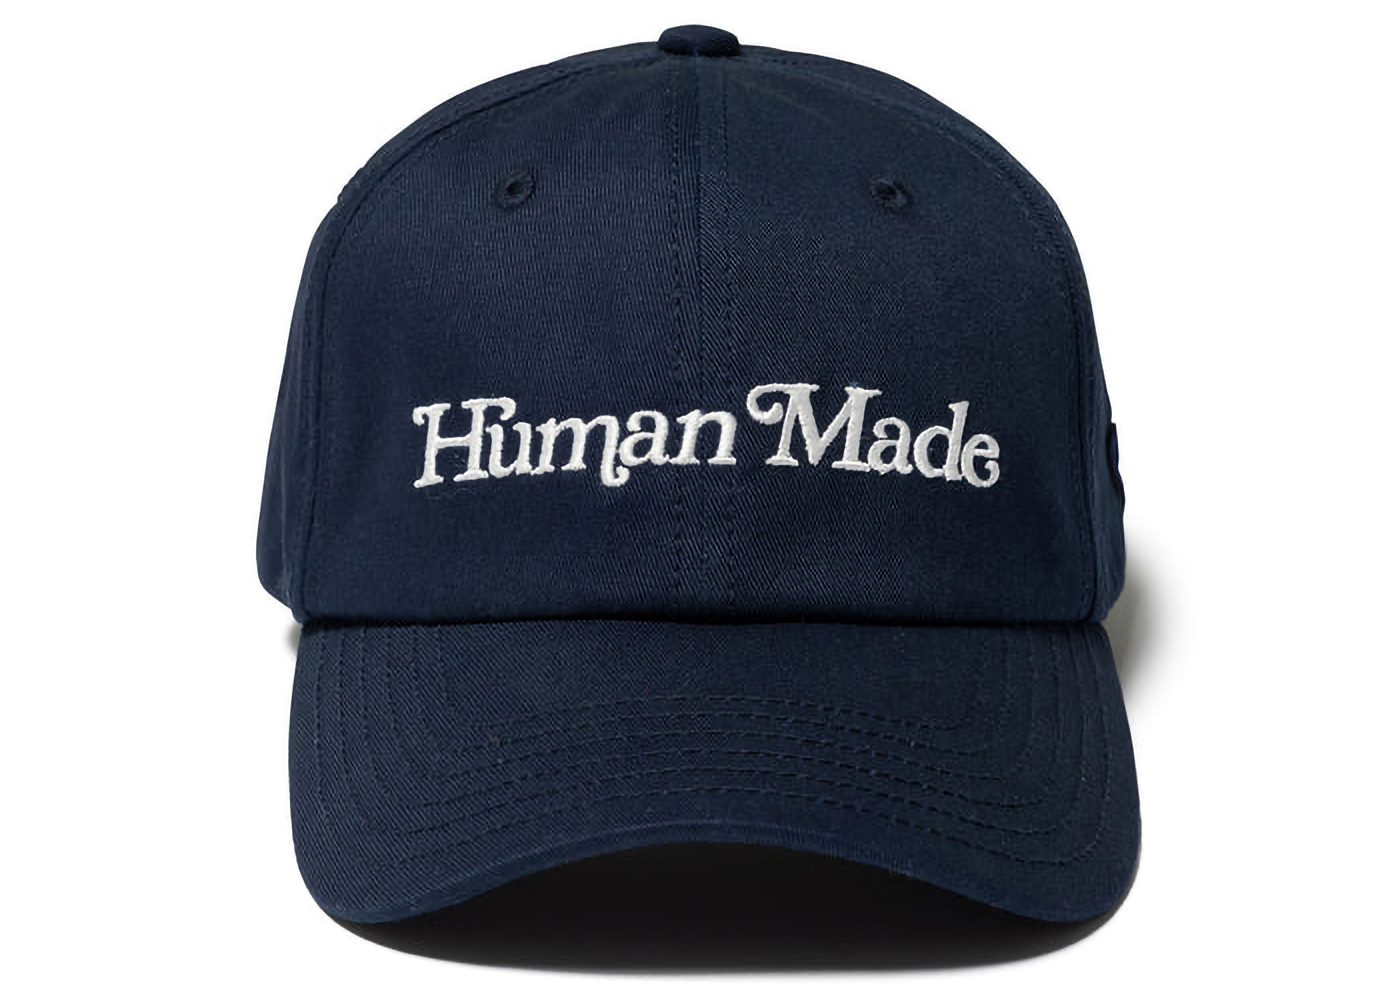 HUMAN MADE x Girls Don't Cry キャップキャップ - キャップ